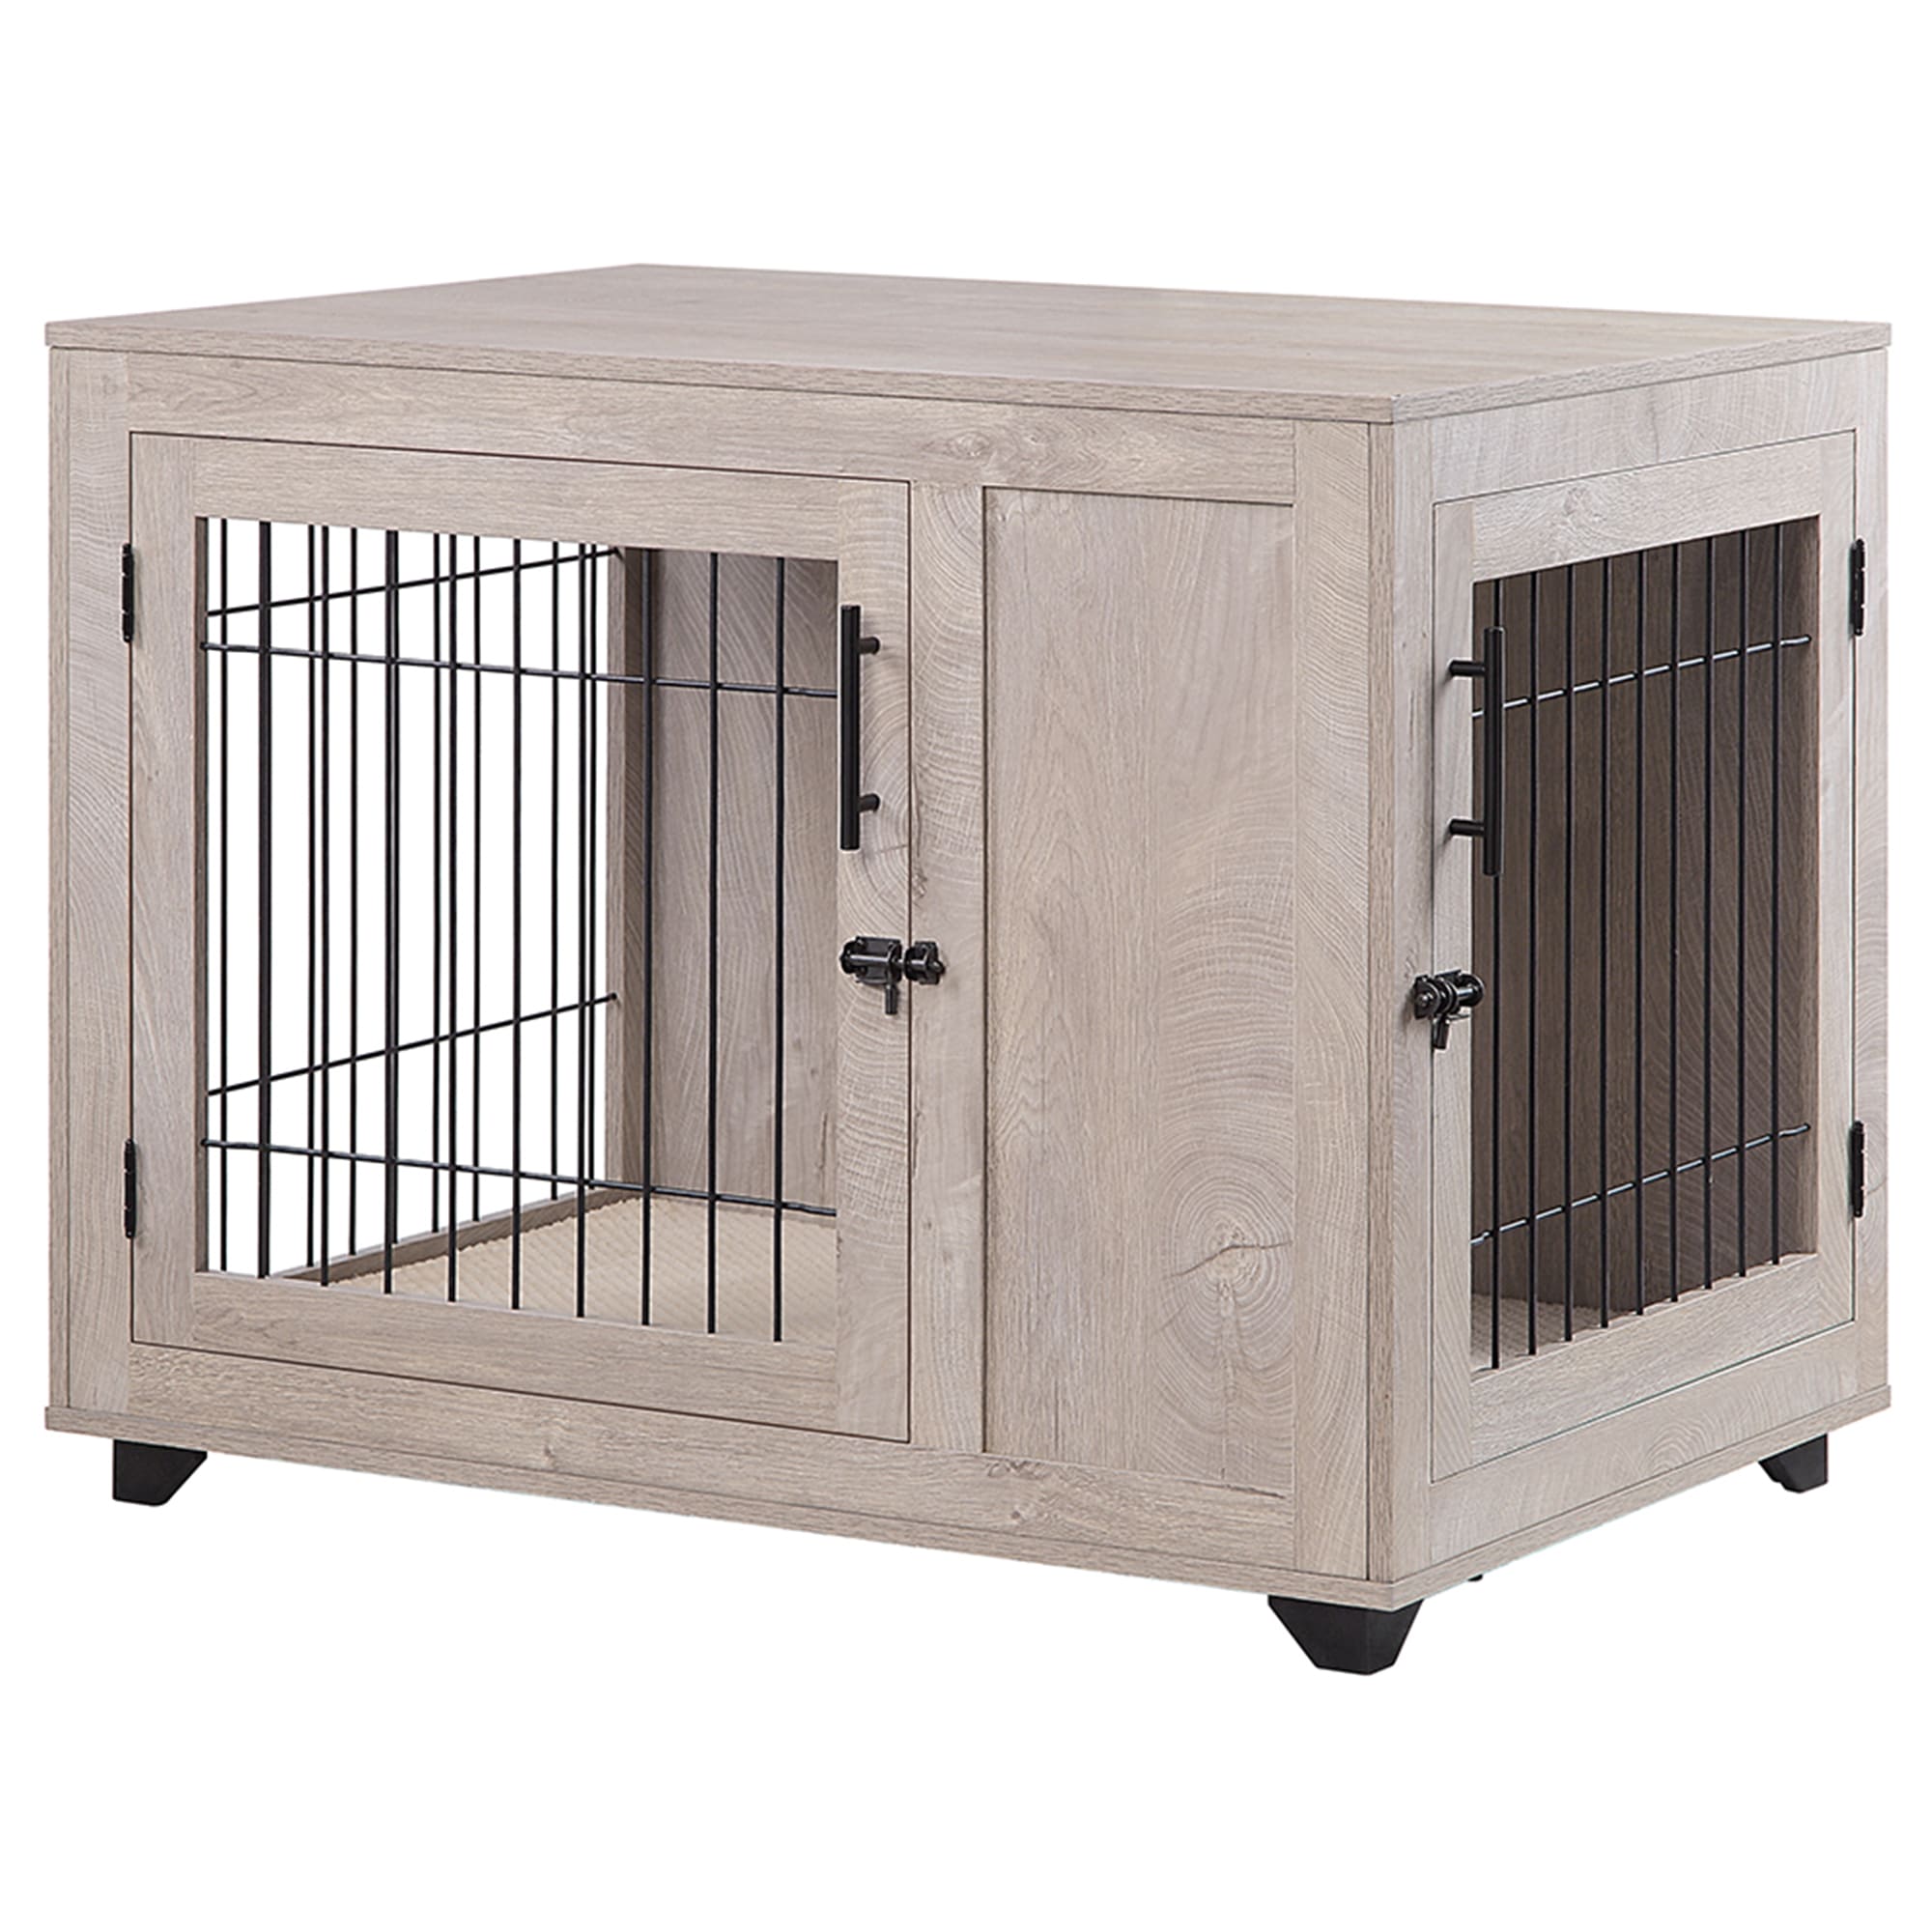 UniPaws Dog Crate in Furniture Style, 